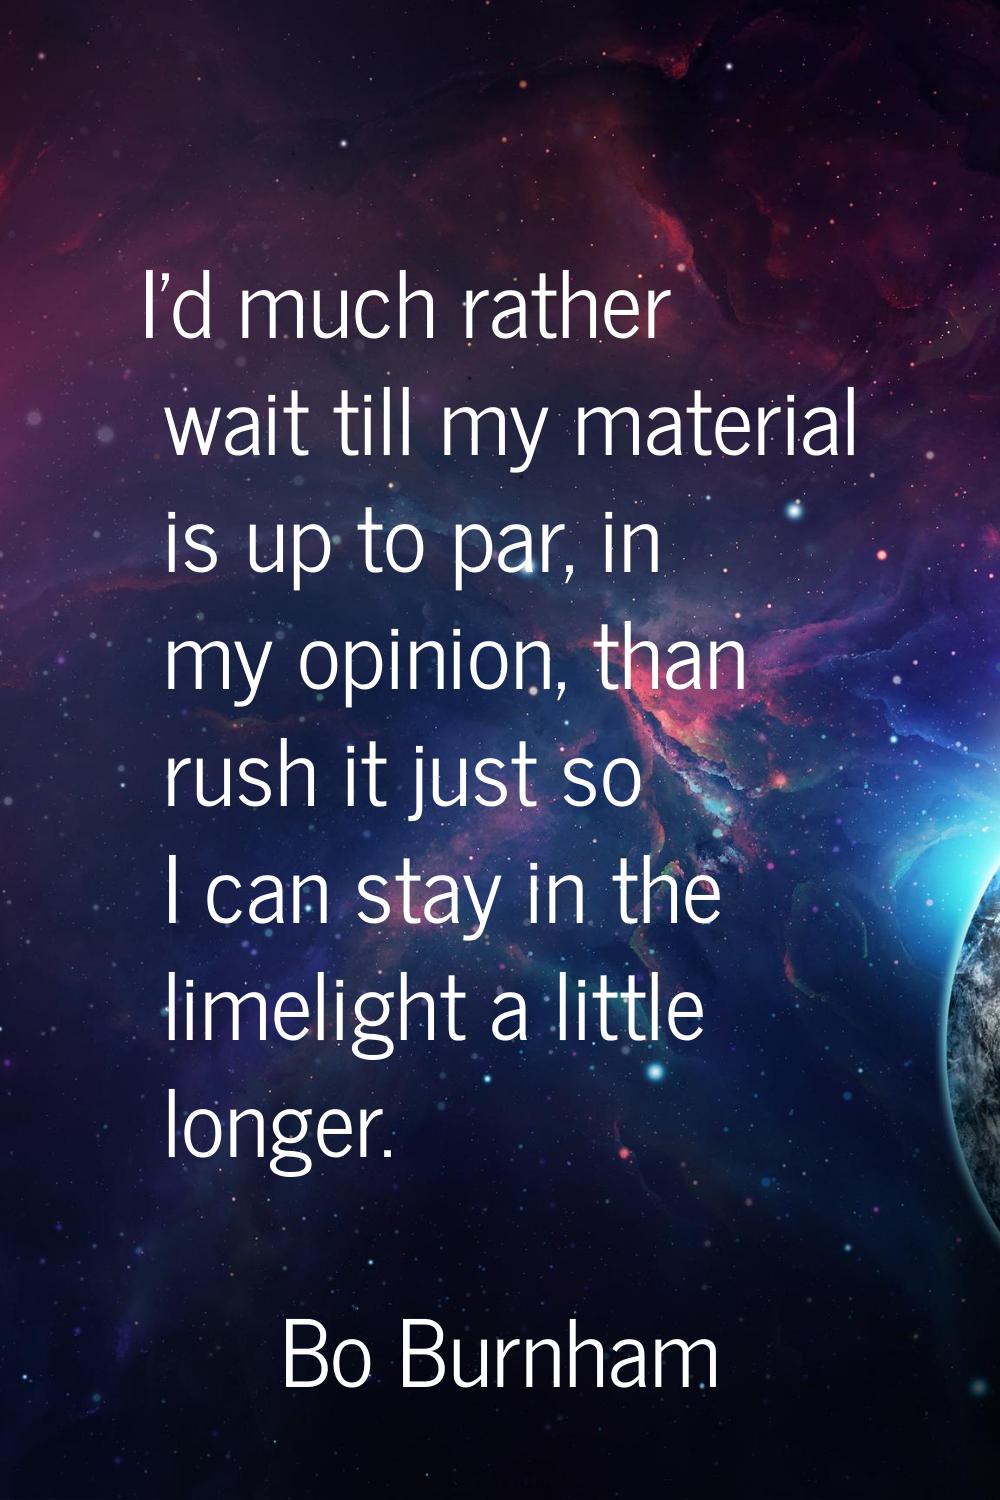 I'd much rather wait till my material is up to par, in my opinion, than rush it just so I can stay 